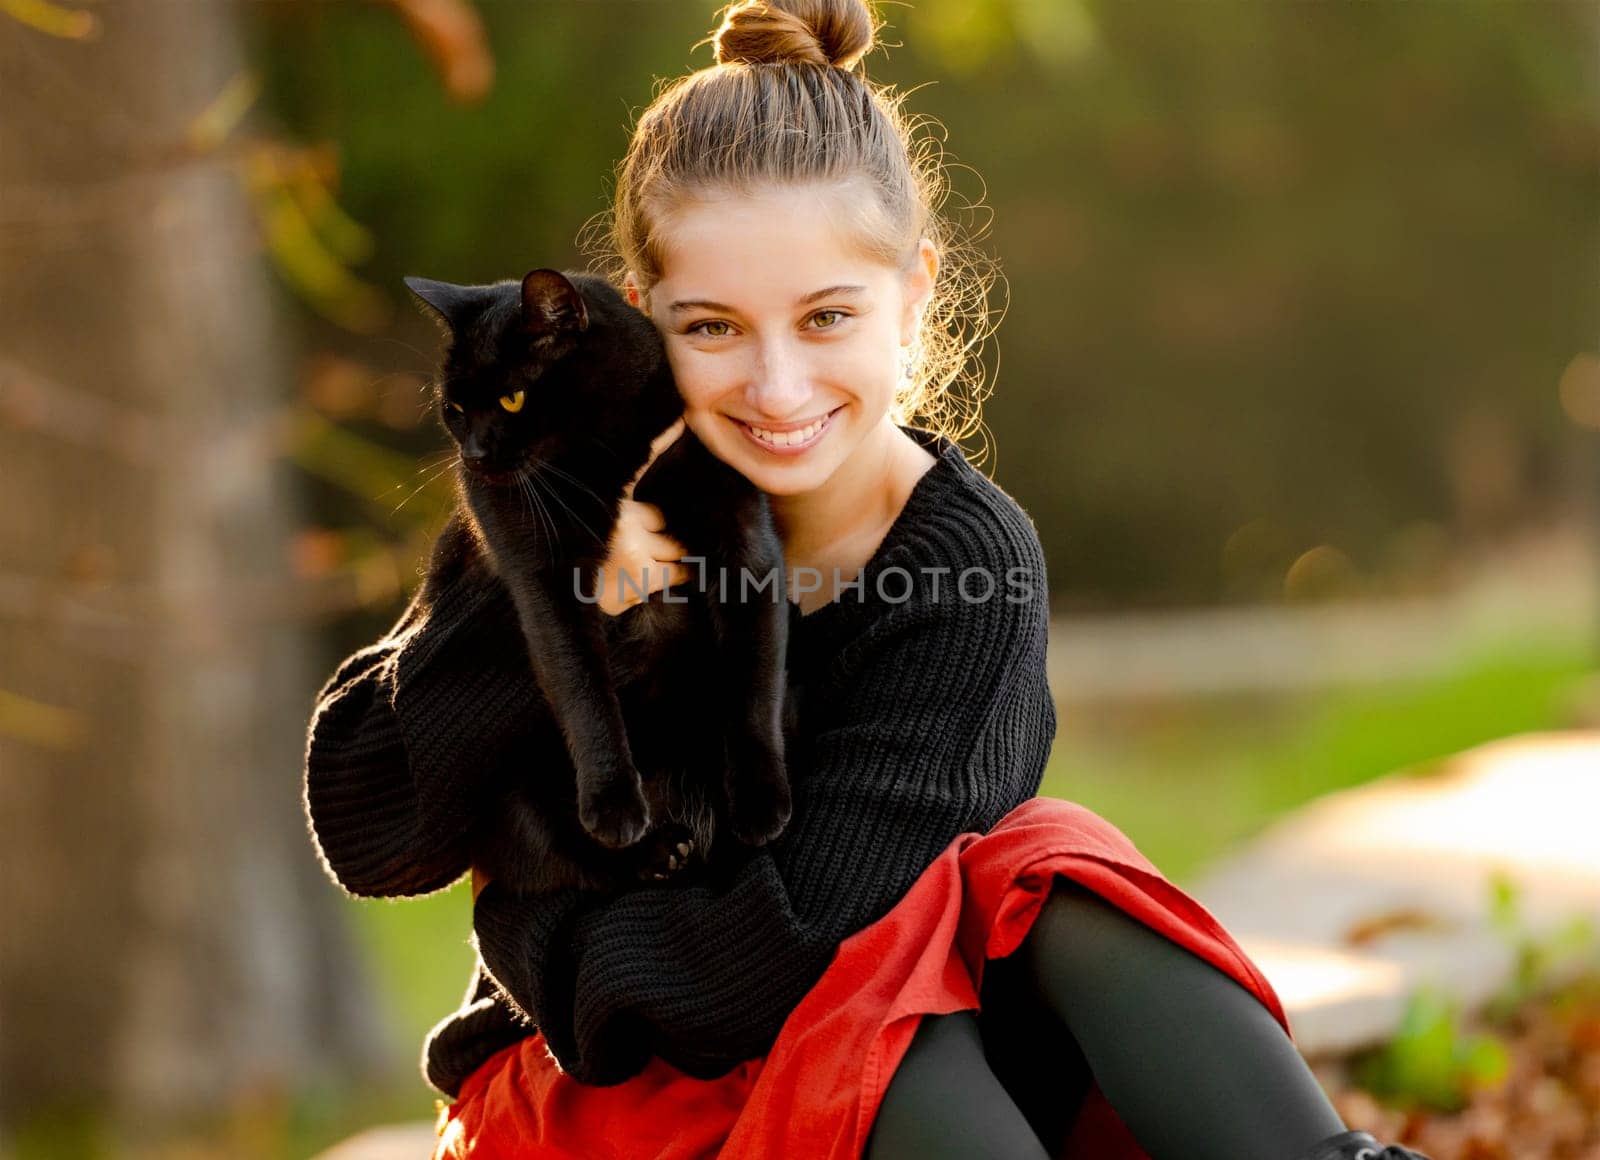 Pretty girl hugging black cat outdoors at street with autumn leaves portrait. Beautiful model teenager with feline animal at park in fall season